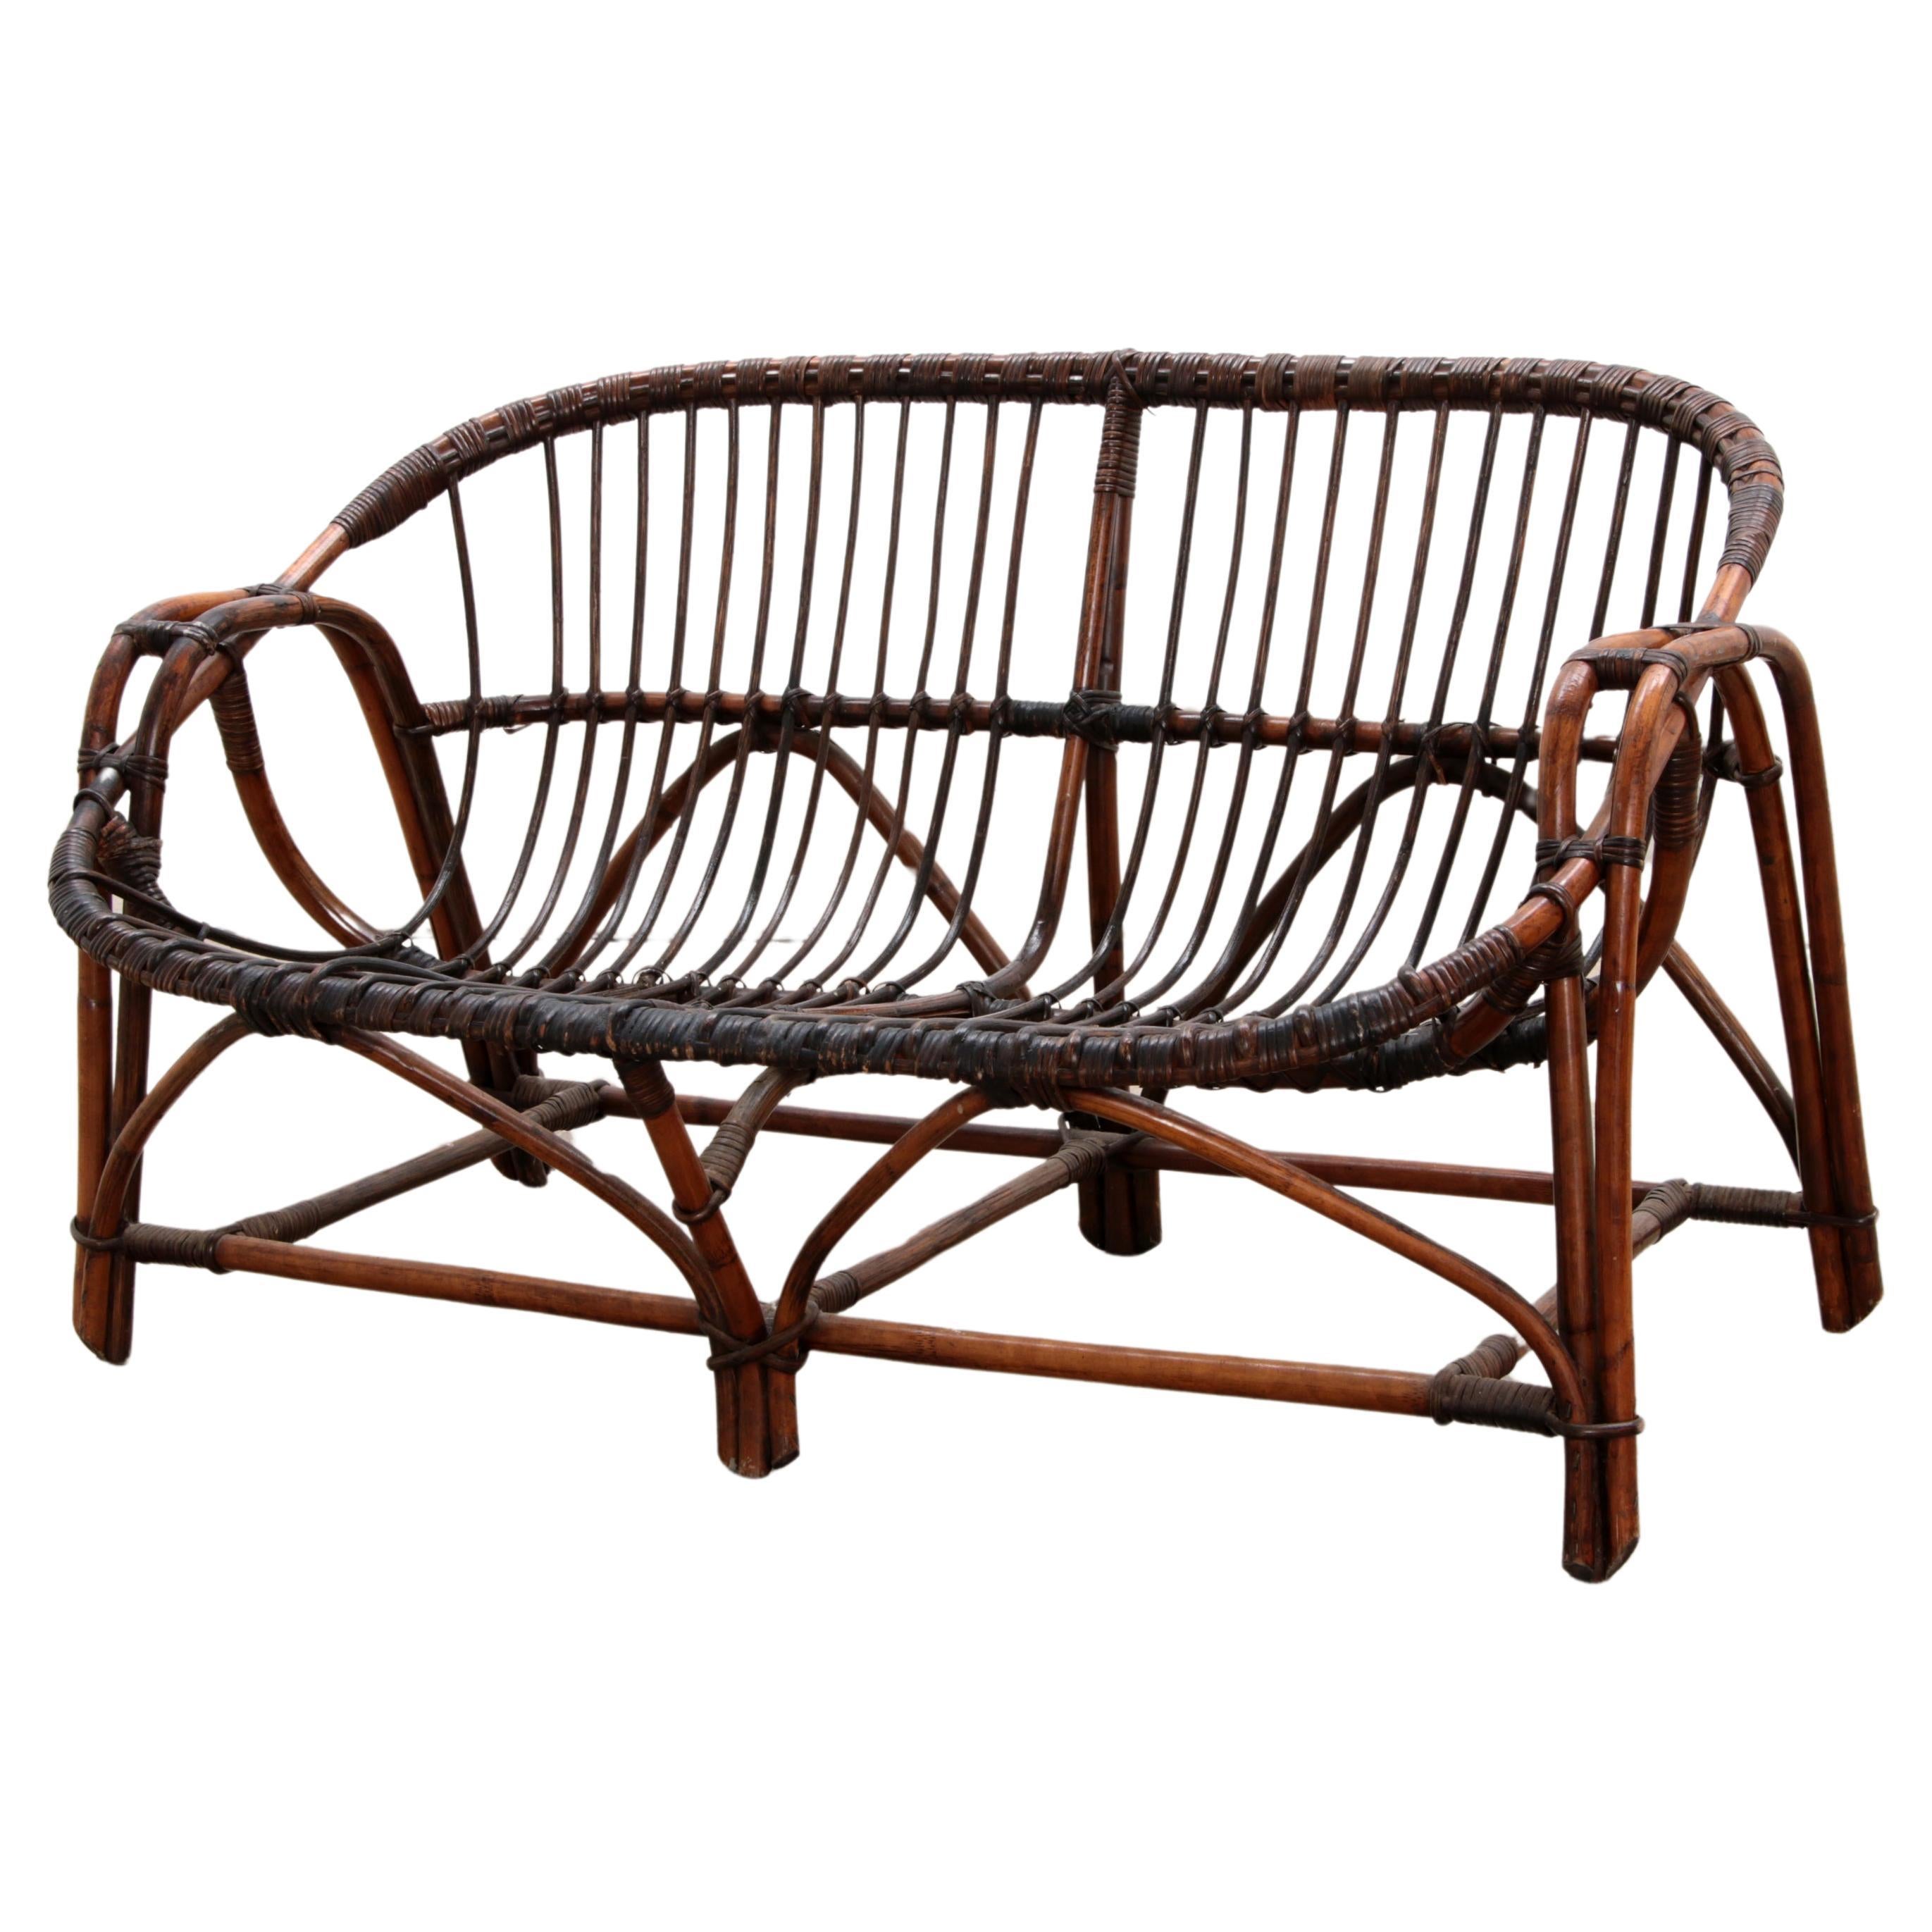 Vintage Rattan Bench - French Design, 1970s For Sale